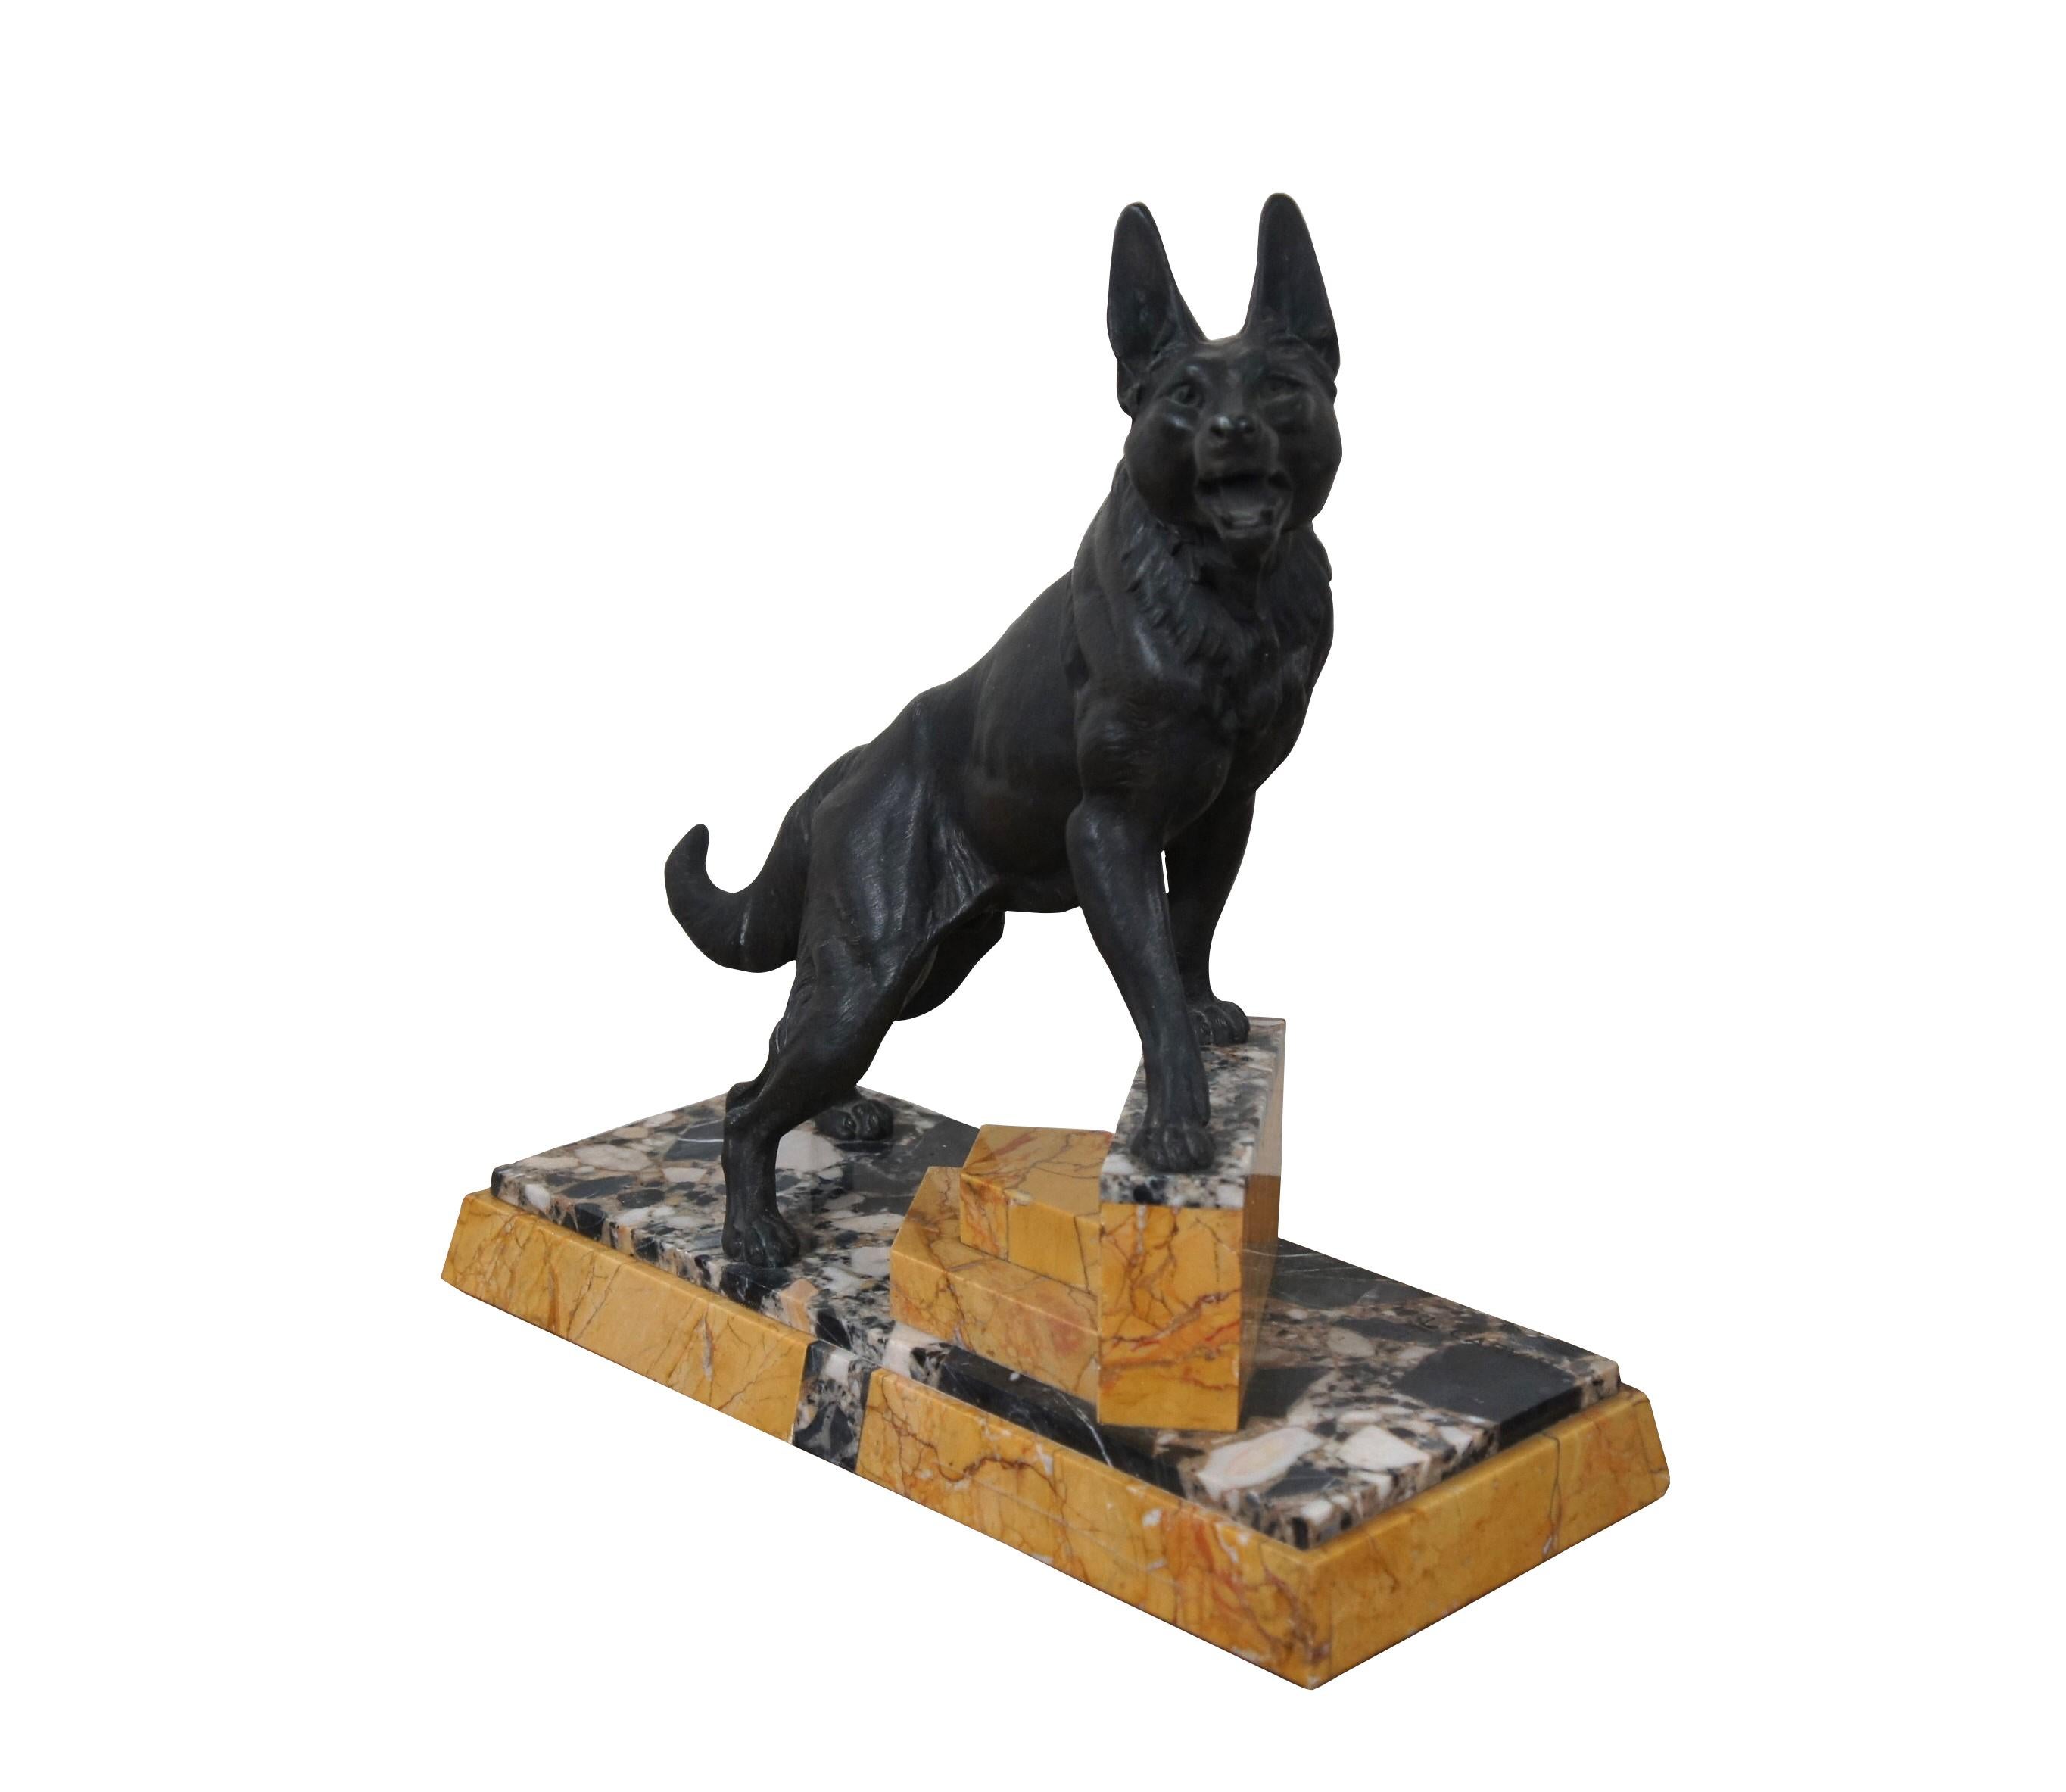 Antique early 20th century art deco spelter sculpture / statue after Louis Albert Carvin, depicting a large wolf like Alsatian German Shepherd / dog with collar, standing on a small set of steps crafted of golden yellow and black and white